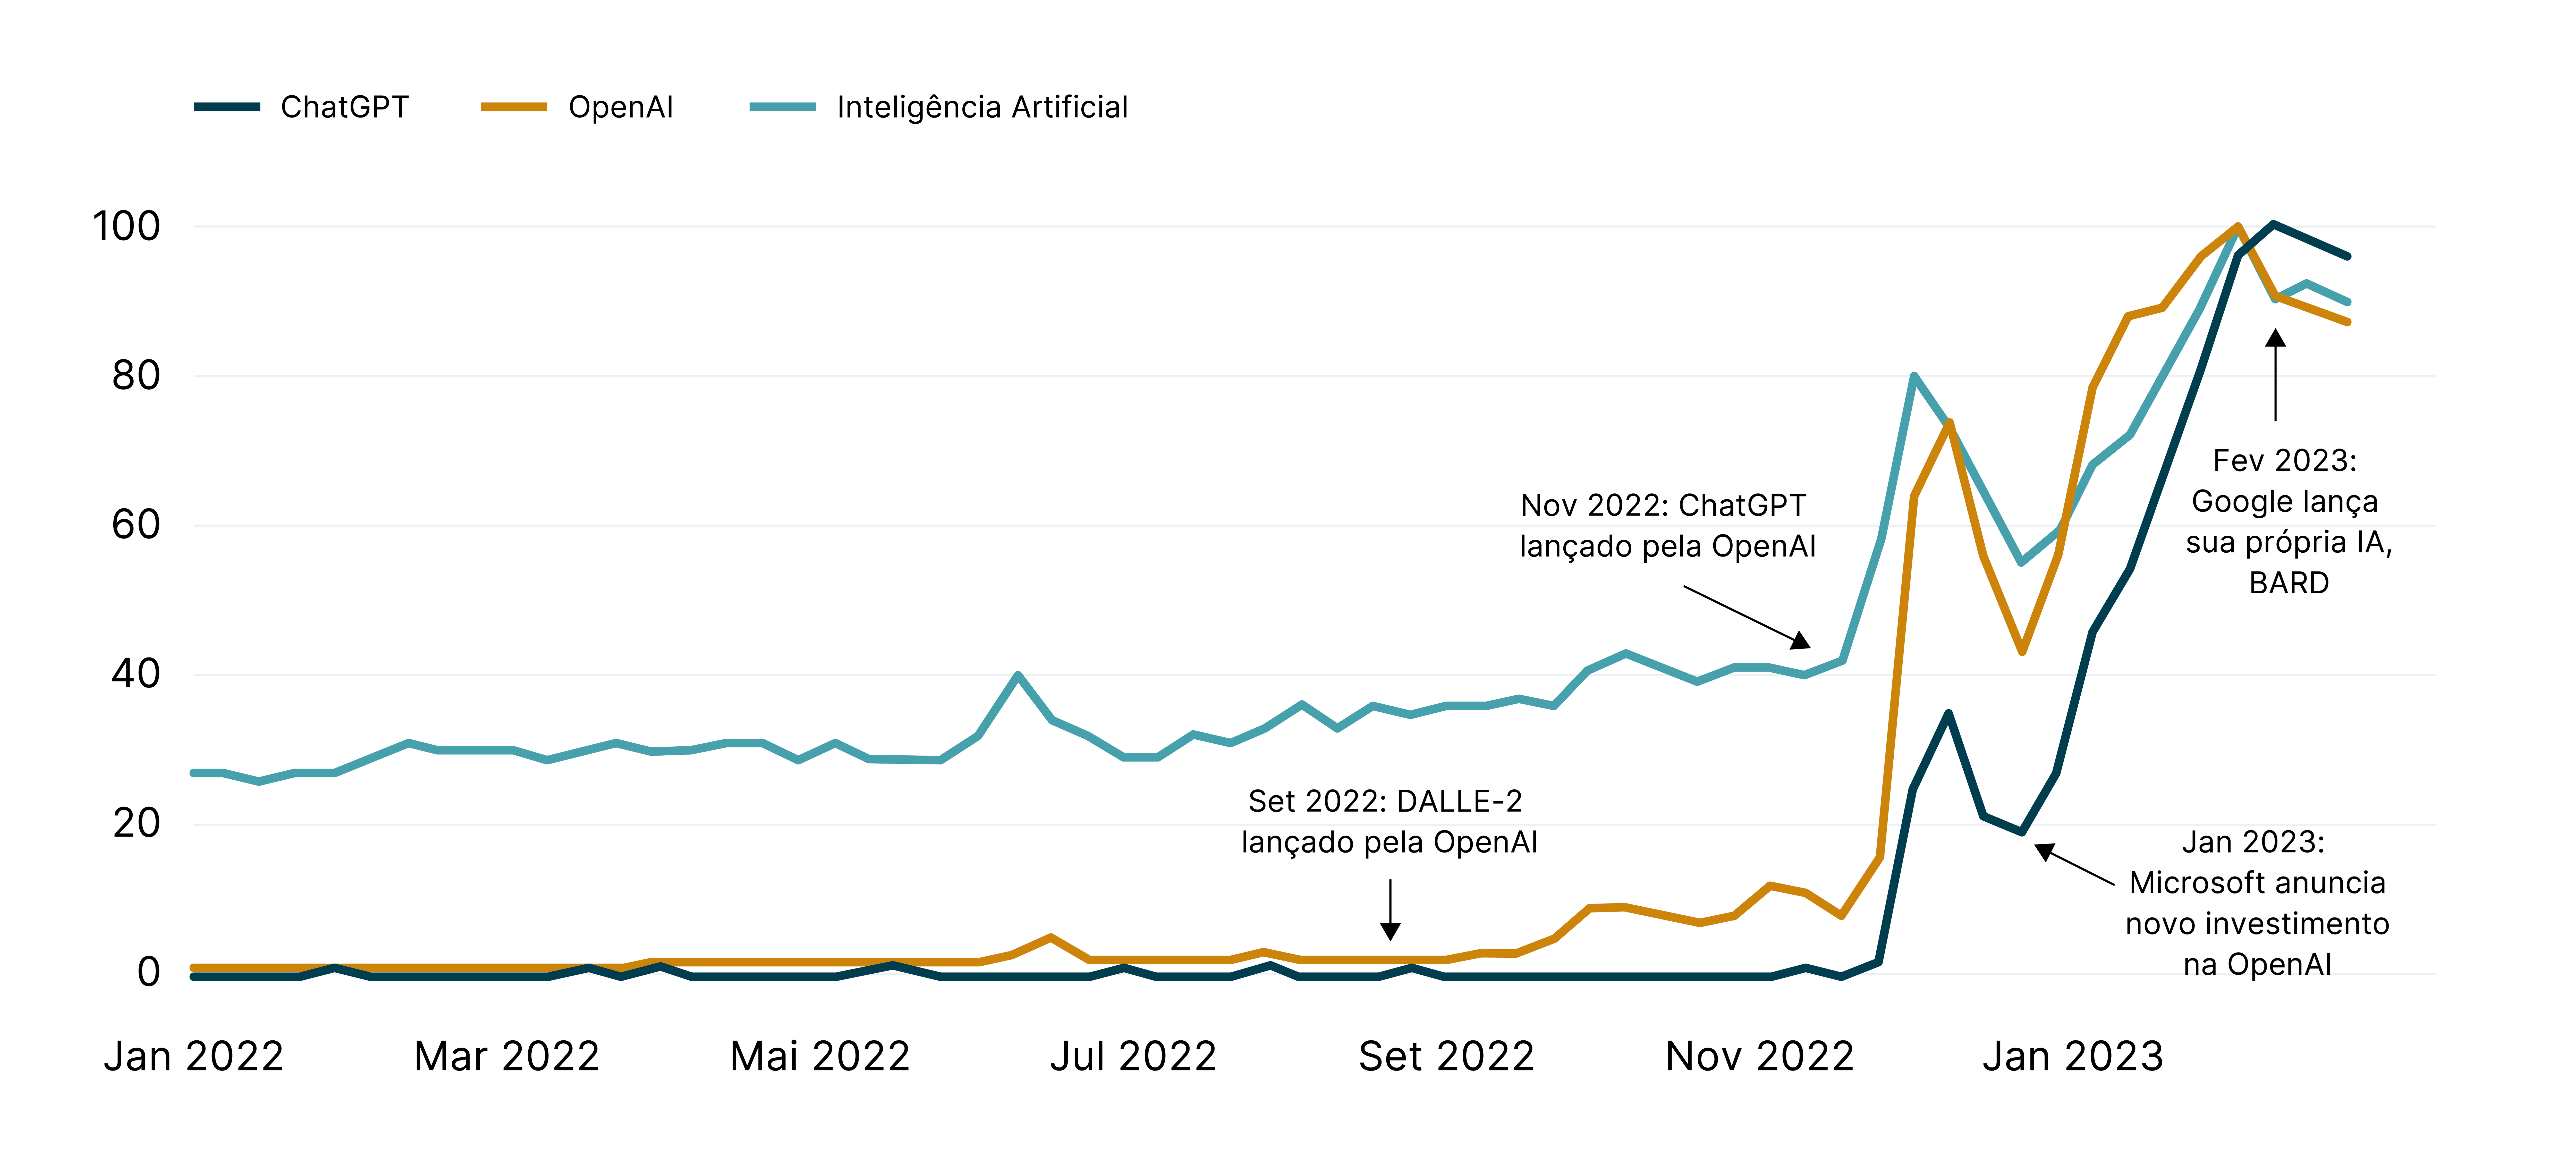 Line graph showing that Google searches for Artificial Intelligence, Chat GPT and Open AI have increased significantly since November 2022.